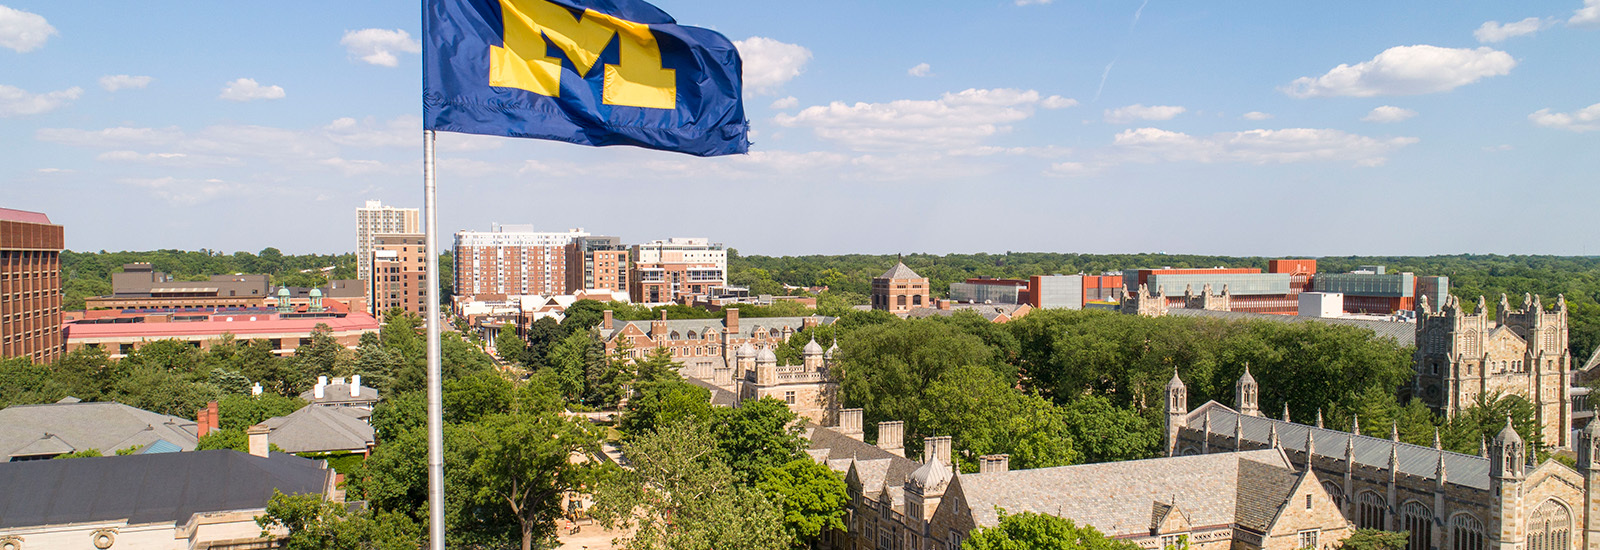 Drone aerial photo of University of Michigan's Central Campus